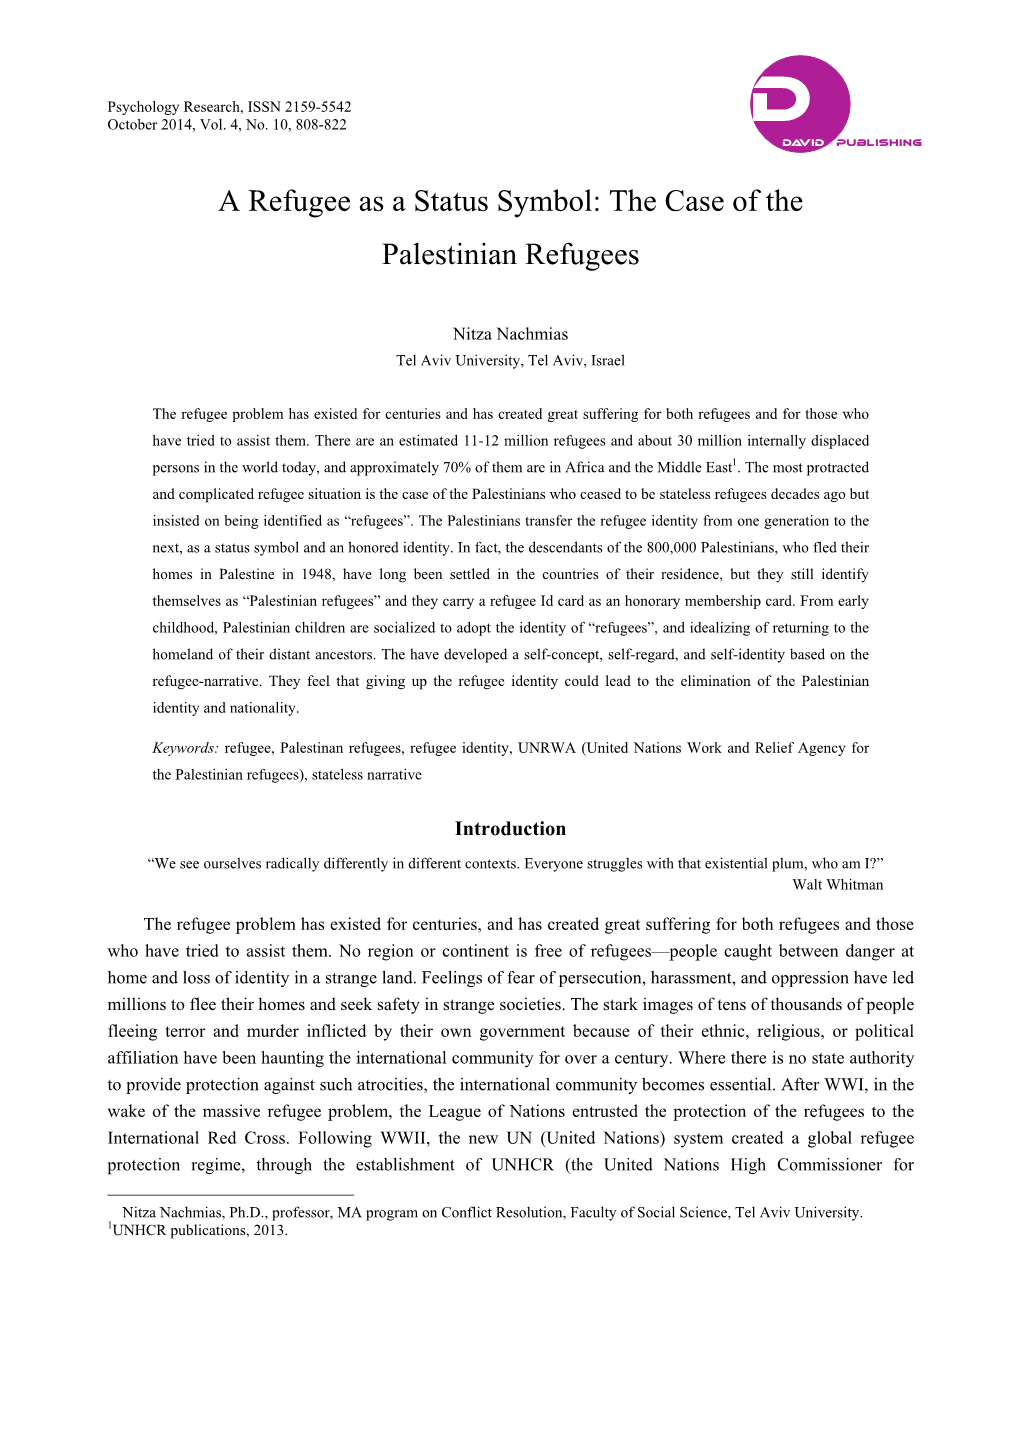 The Case of the Palestinian Refugees